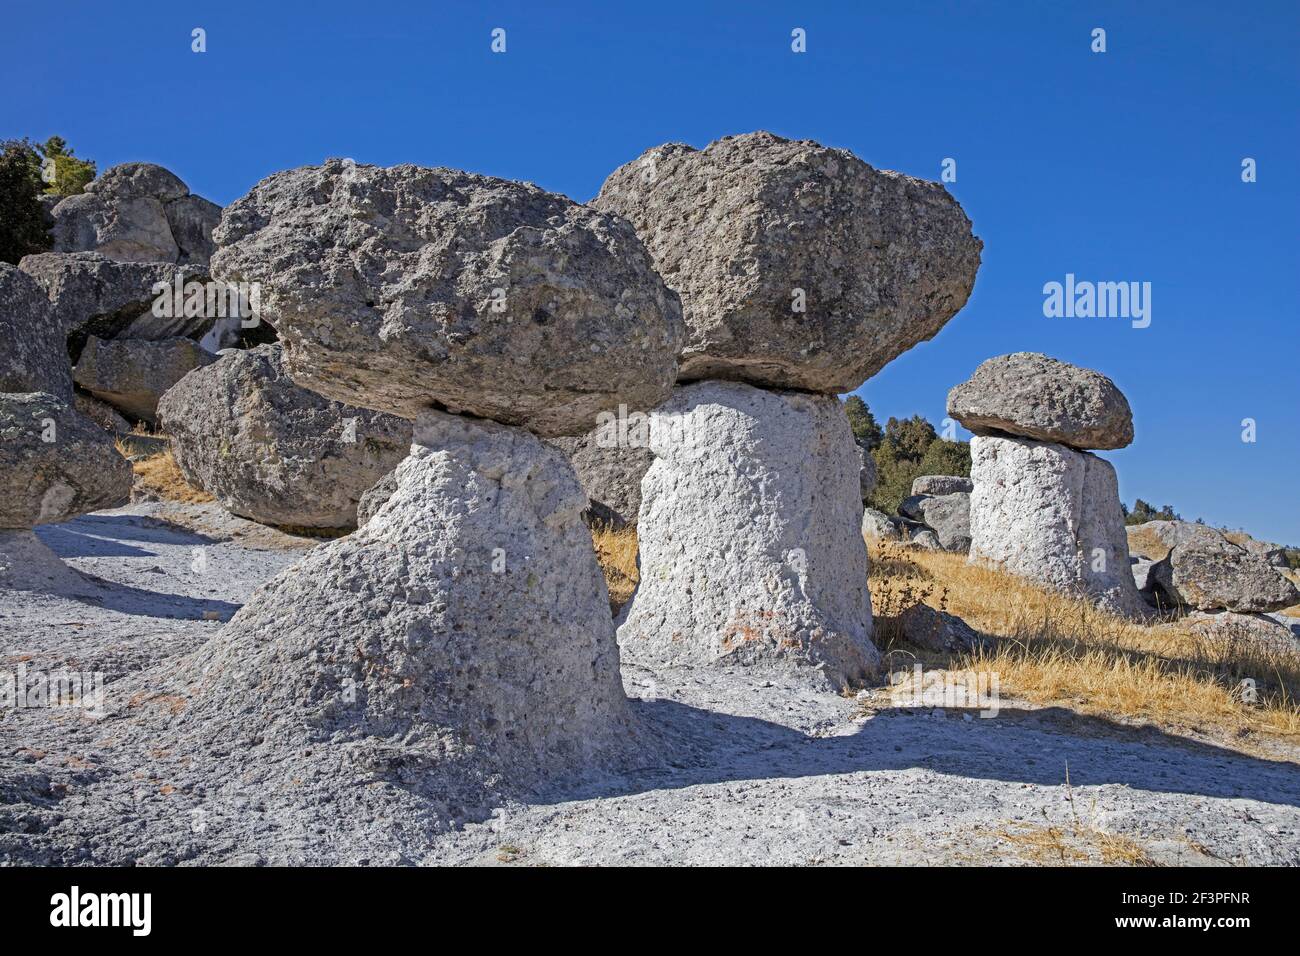 Mushroom shaped rock formations in the Valley of the Mushrooms / Valle de Ongos near the town Creel, Sierra Madre Occidental, Chihuahua, Mexico Stock Photo